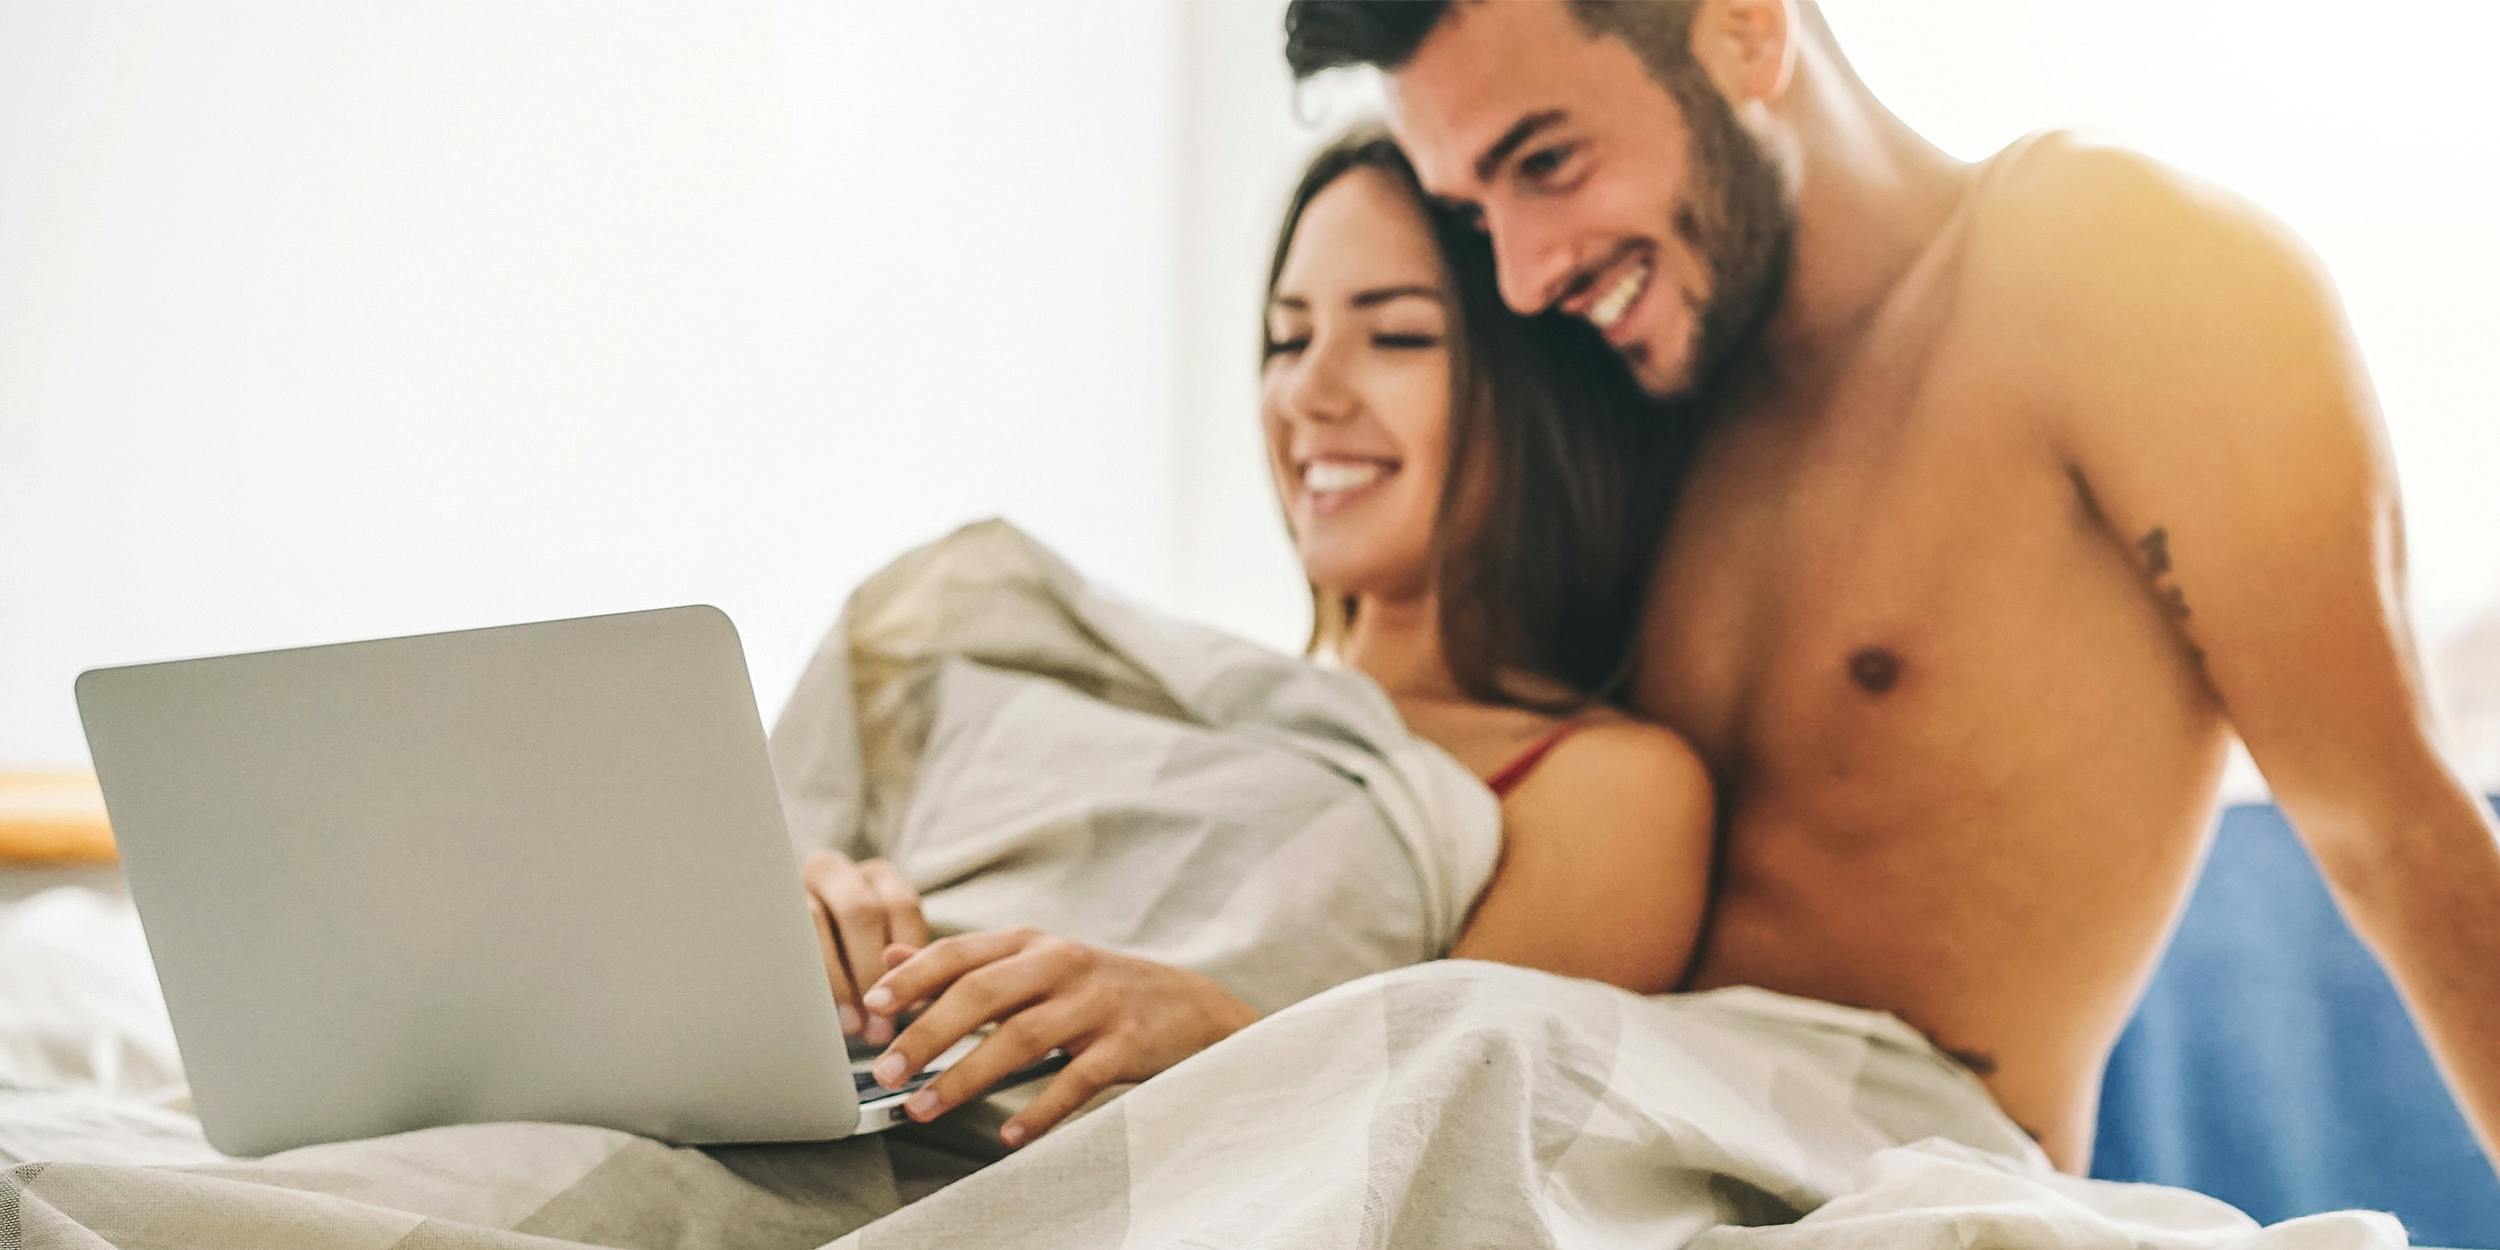 brady twitchell recommends Best Porn Videos For Couples